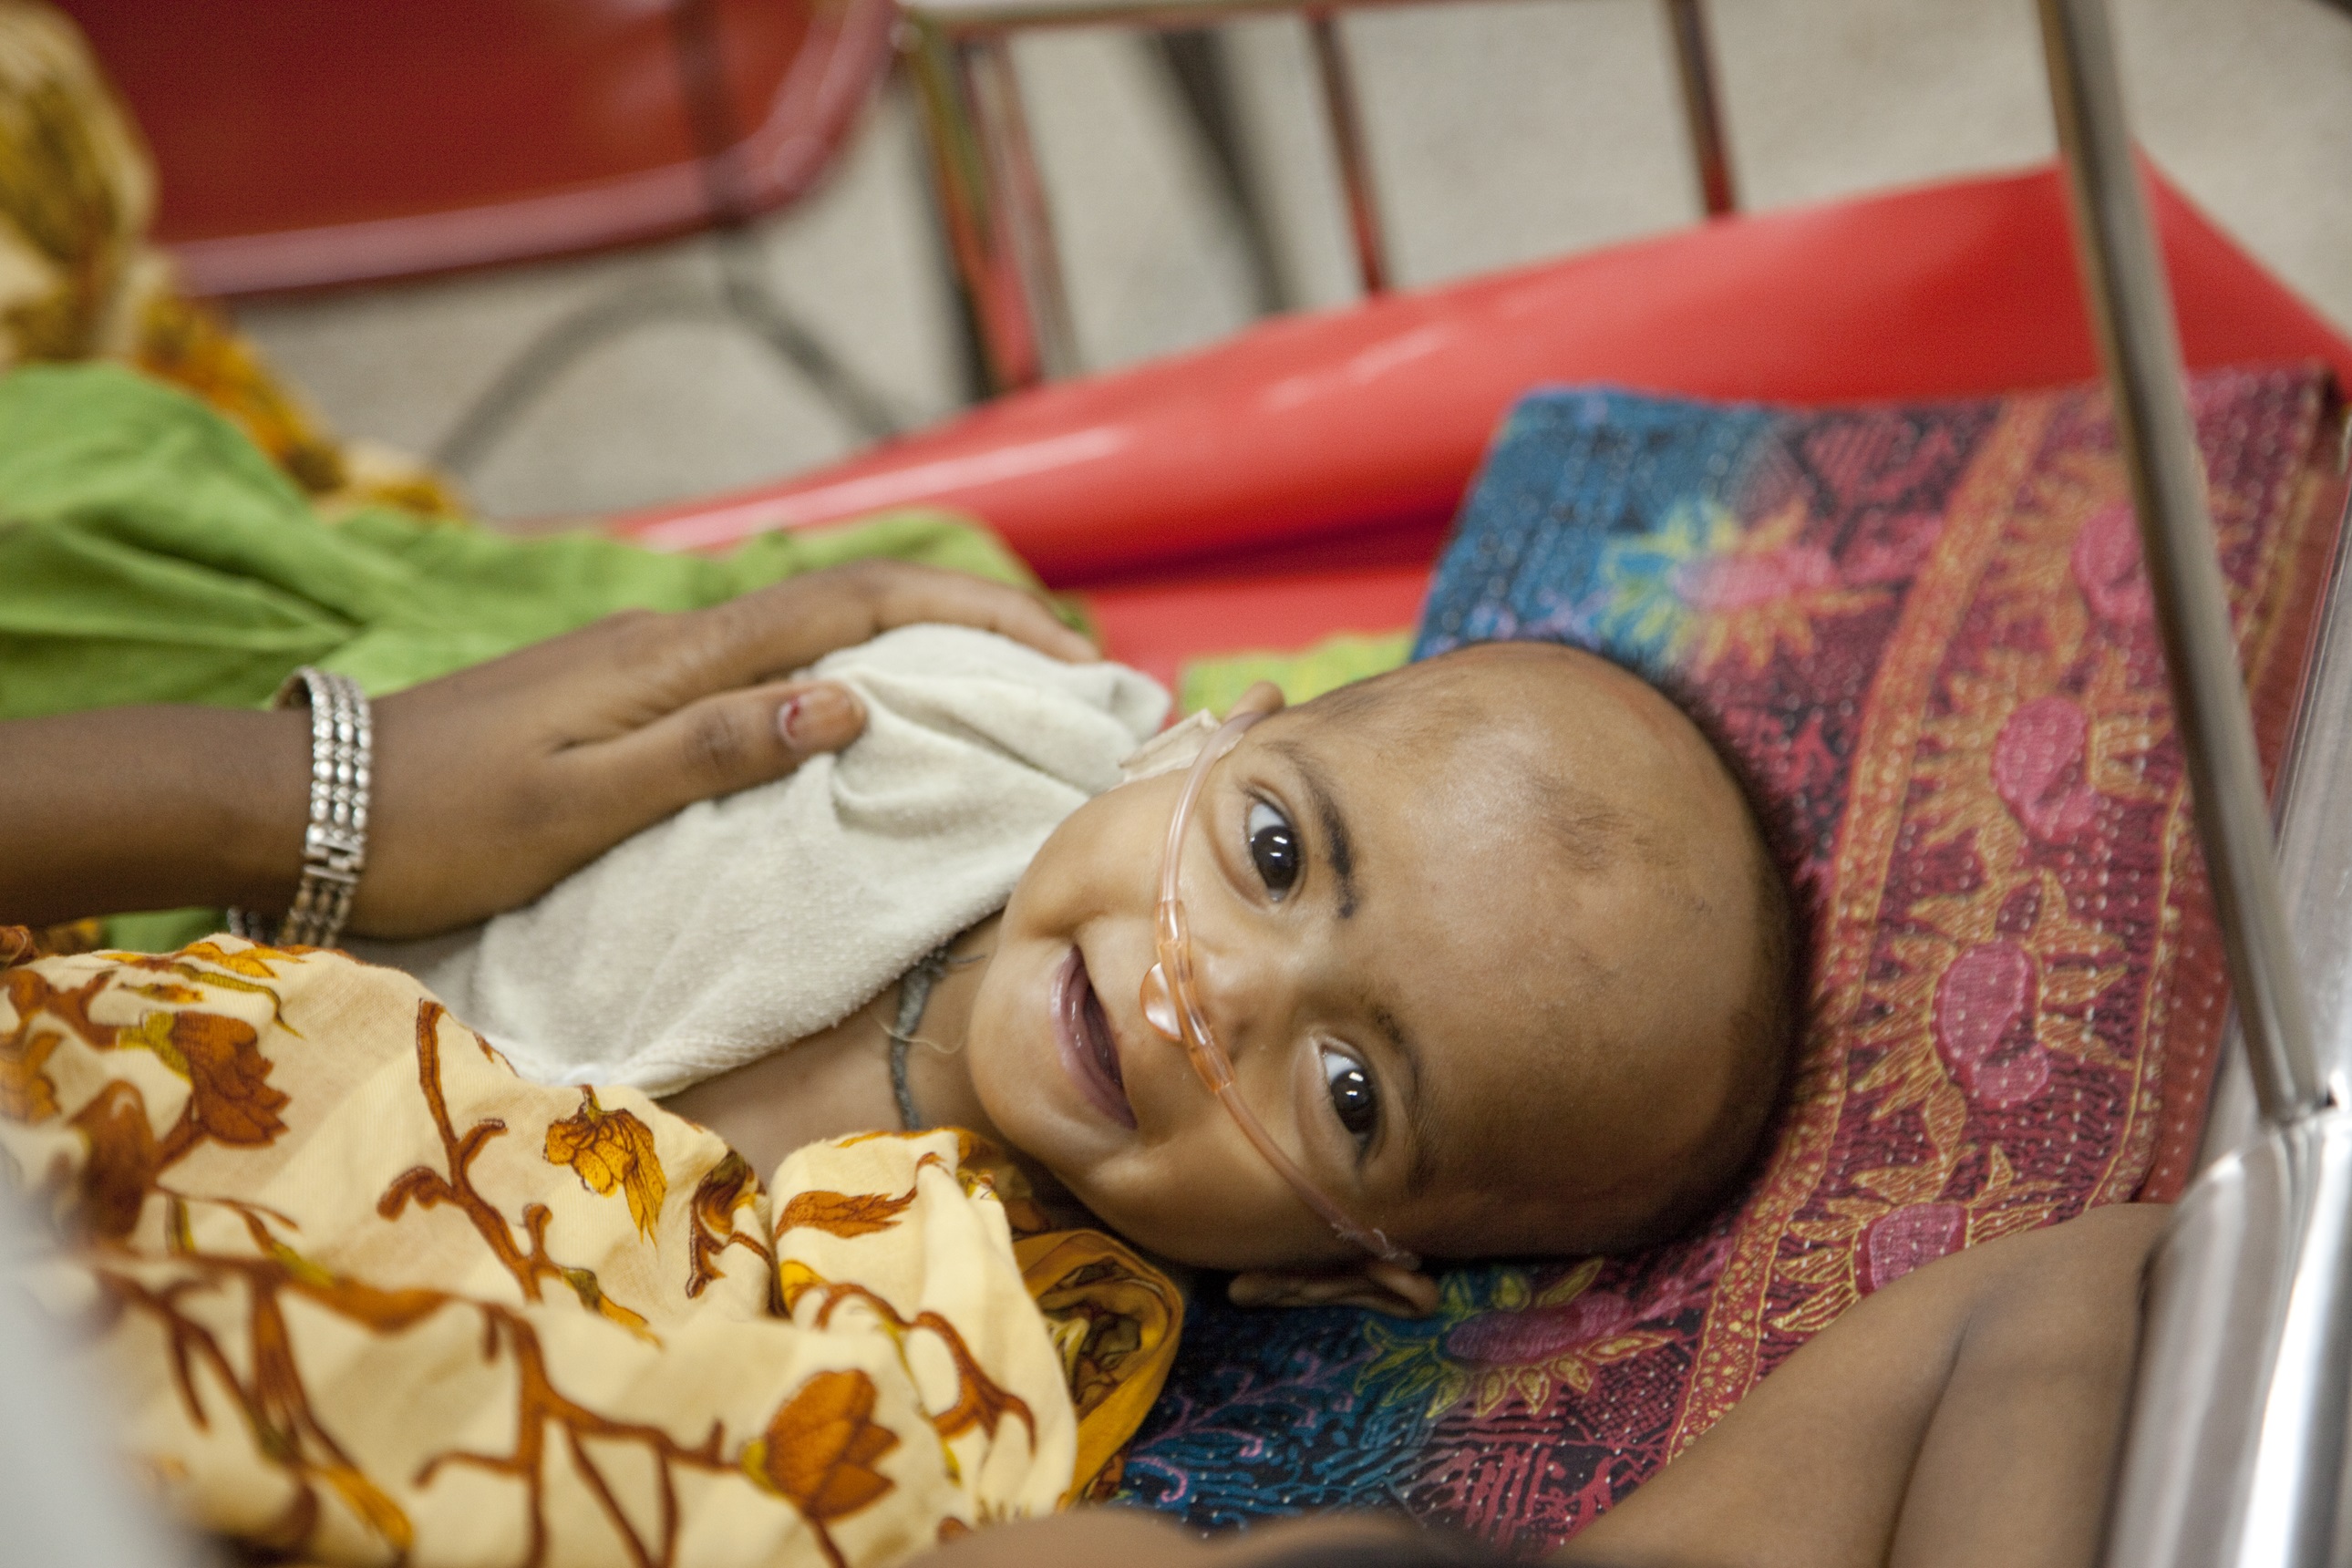 A young patient at ICDDR,B Dhaka Hospital.